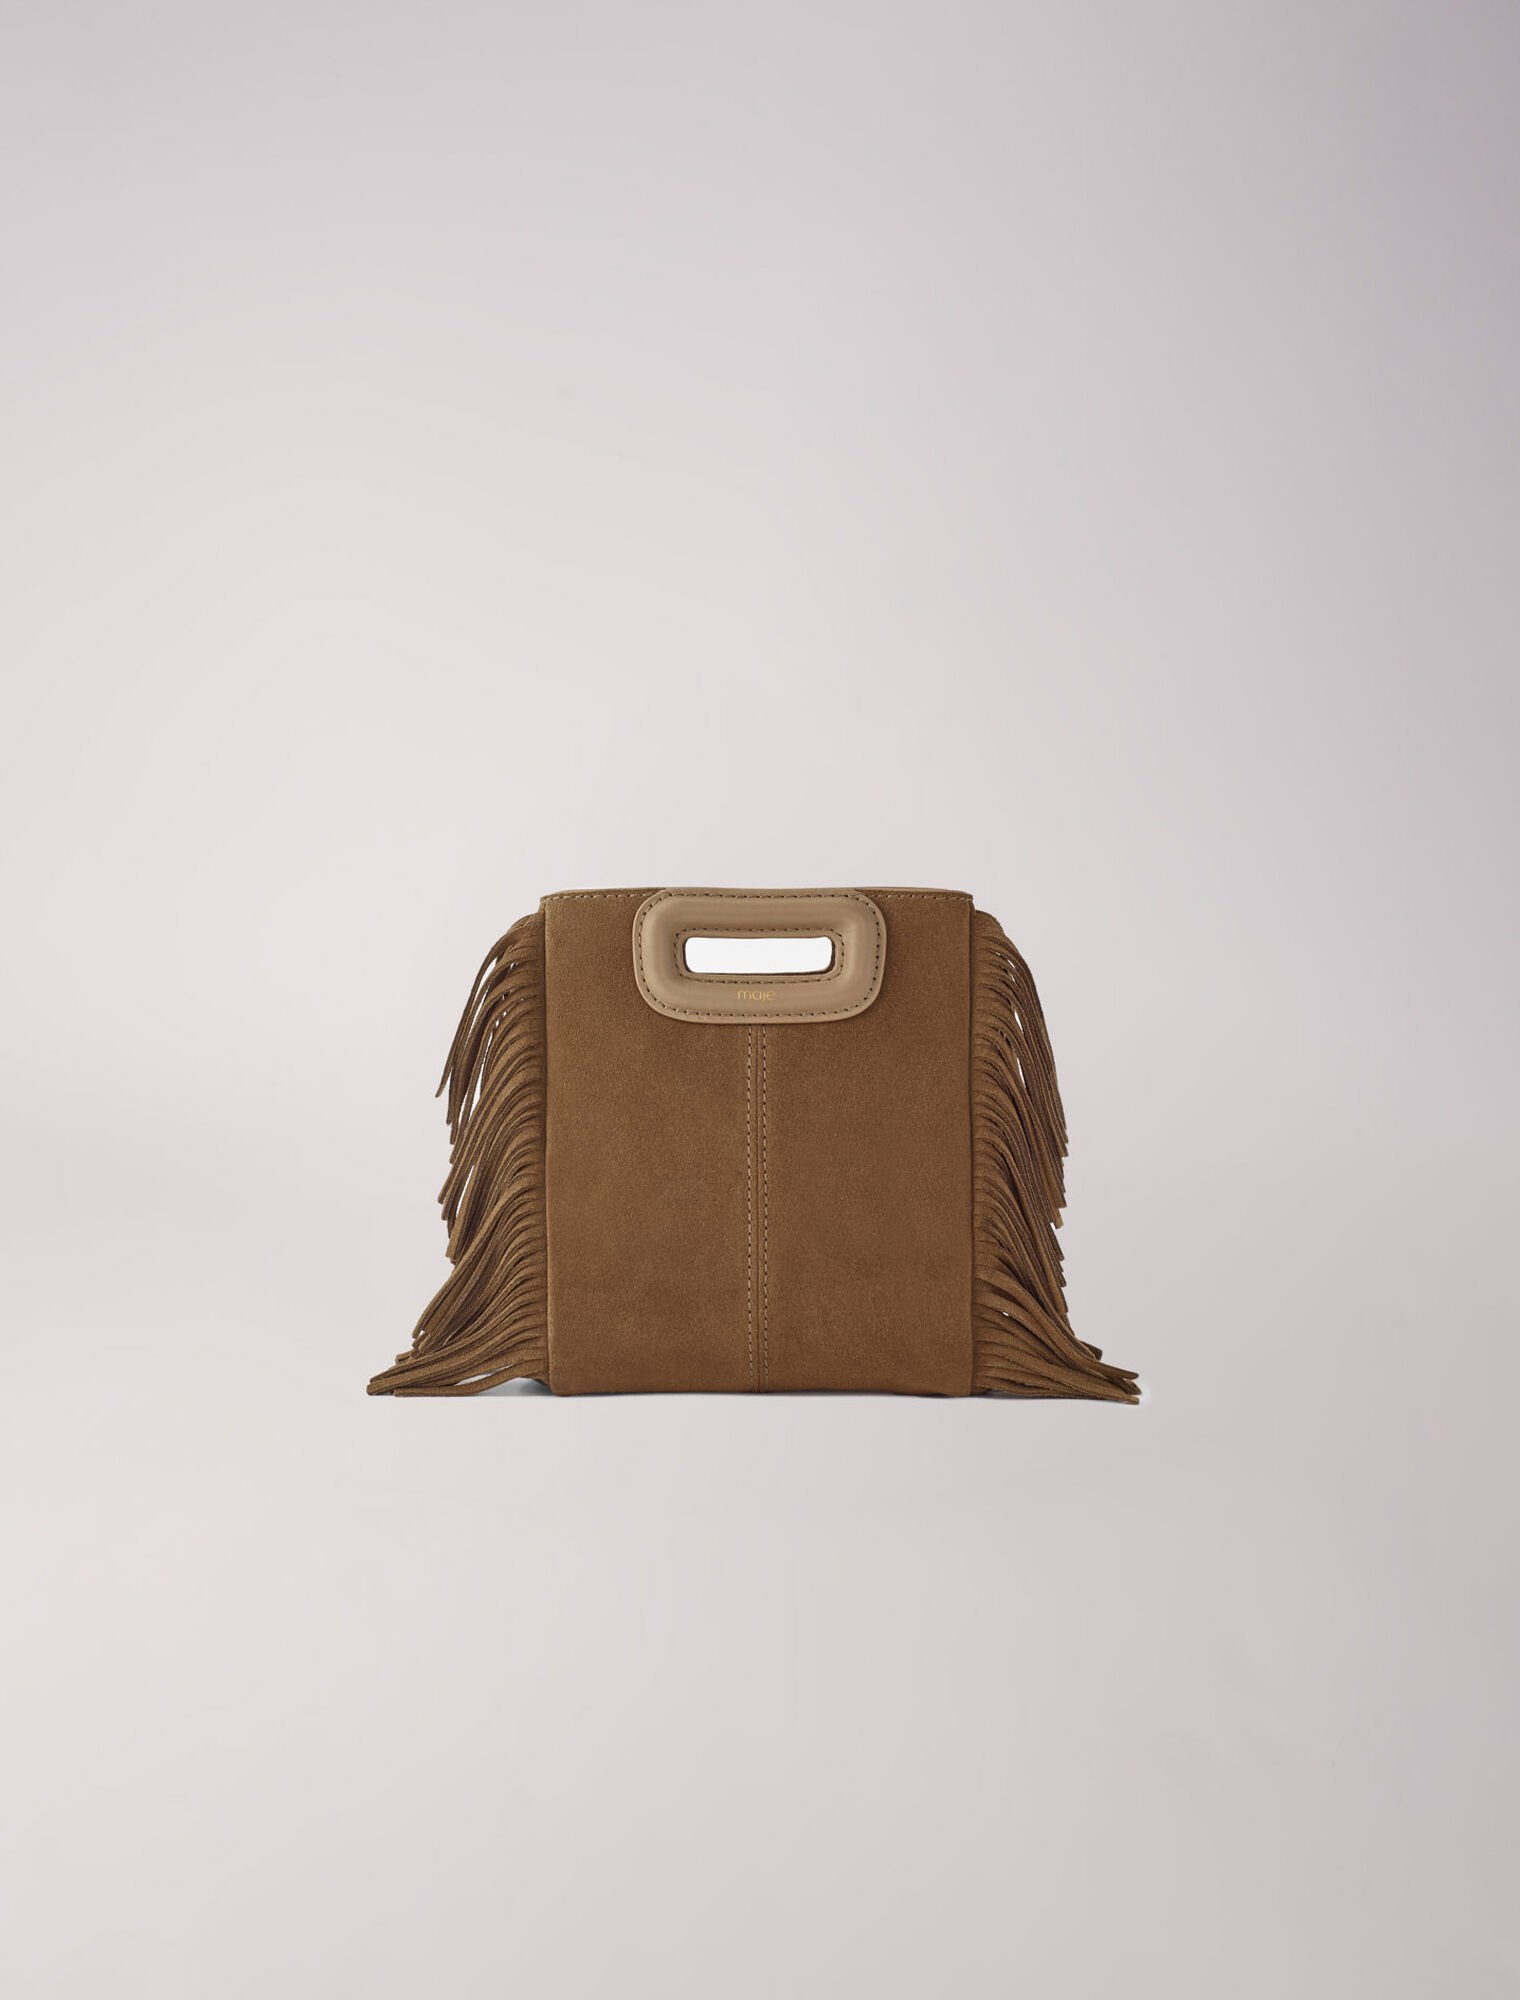 M mini bag in suede leather